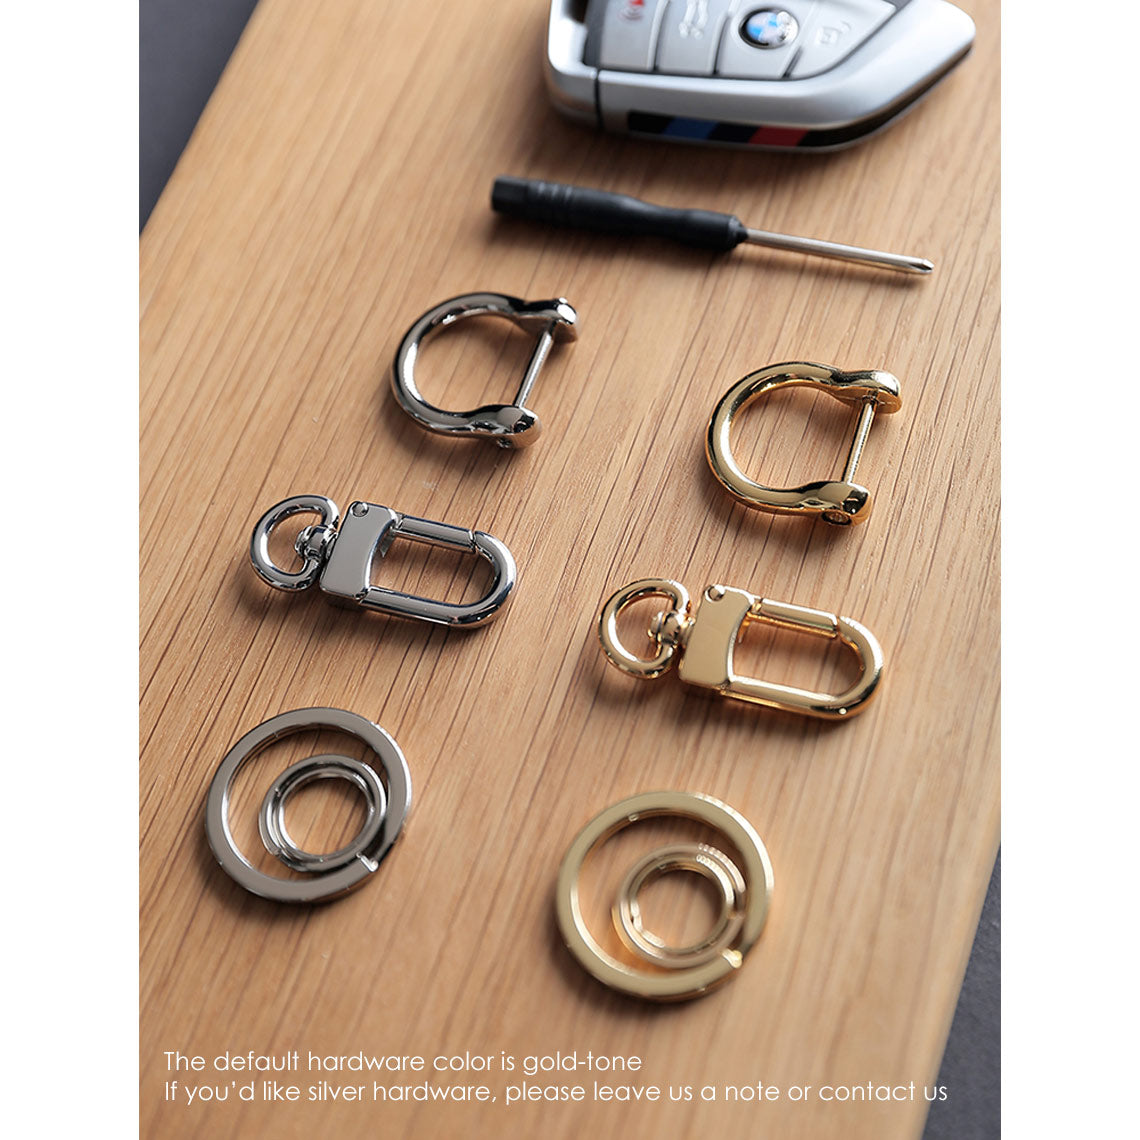 High quality Silver/Gold Hardware in DIY Keychain Kits POPSEWING®